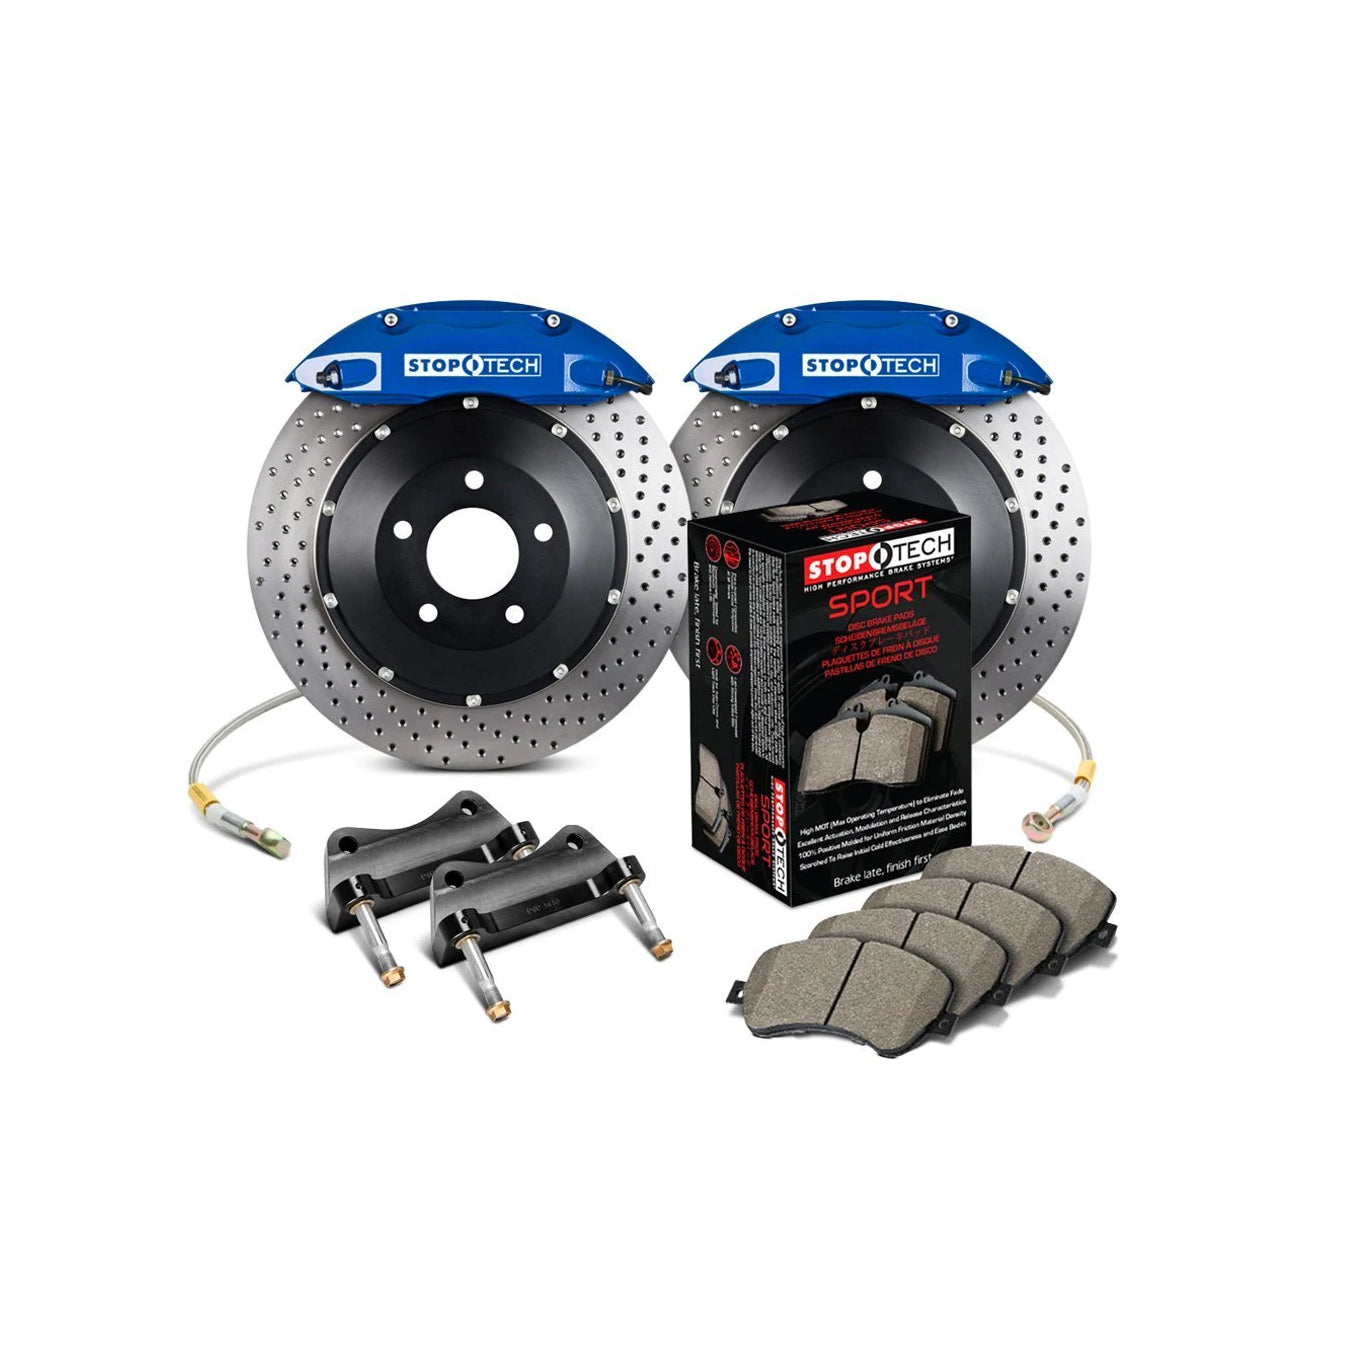 Stoptech 355 ST40 Big Brake Kit For E9x M3 – Silicon Valley Bimmer